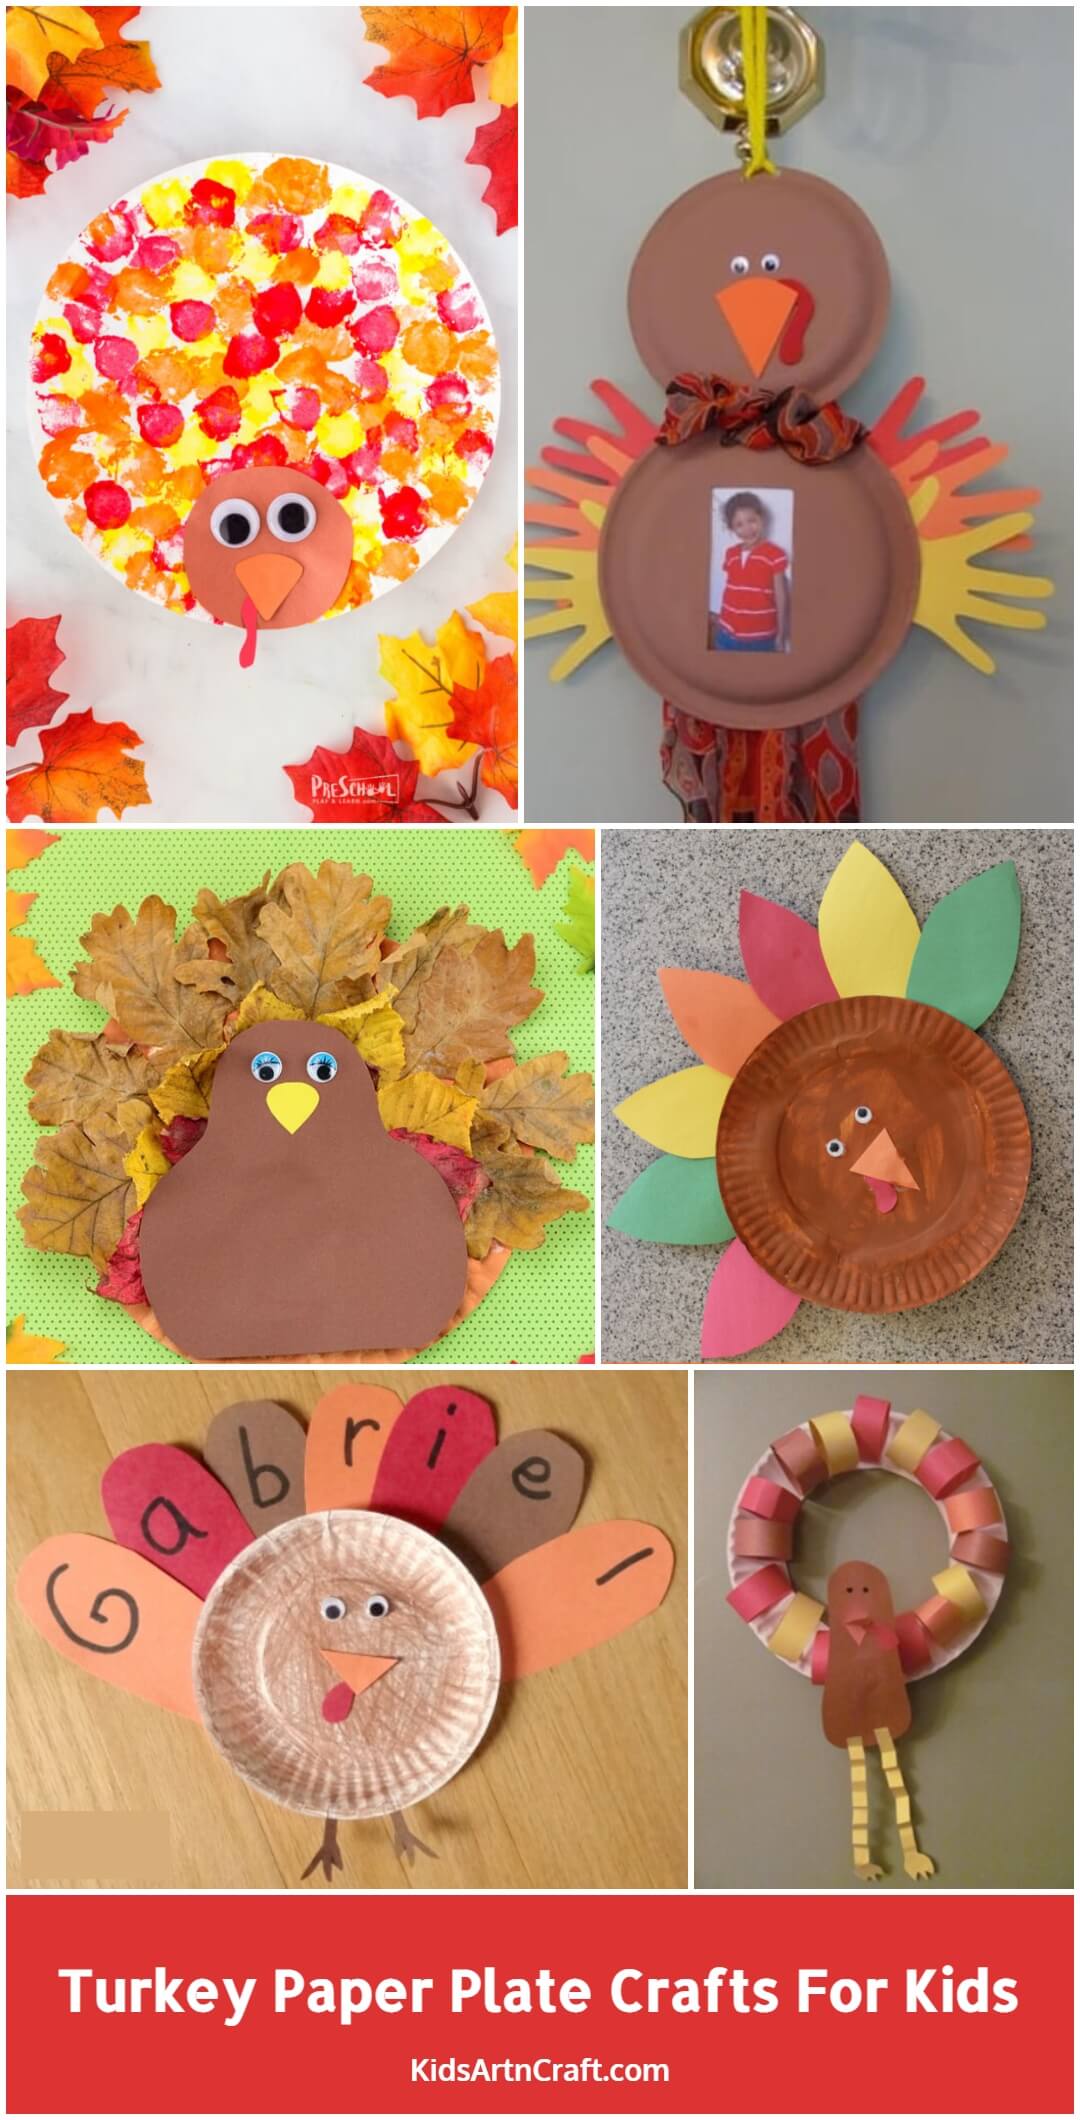 Turkey Paper Plate Crafts for Kids